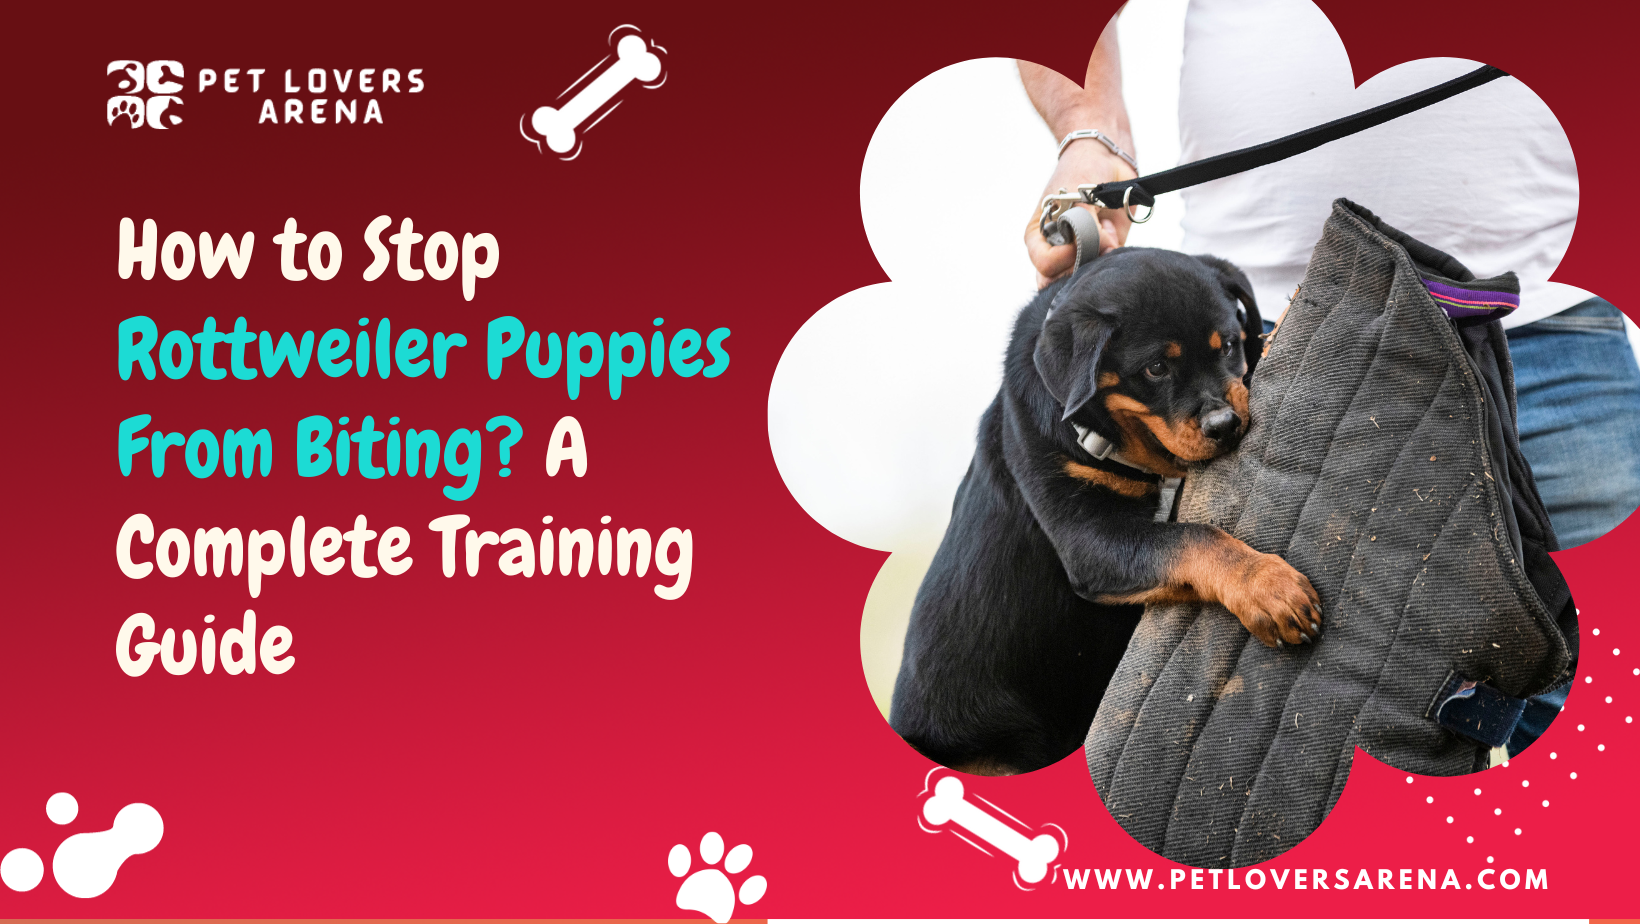 How to Stop Rottweiler Puppies From Biting?